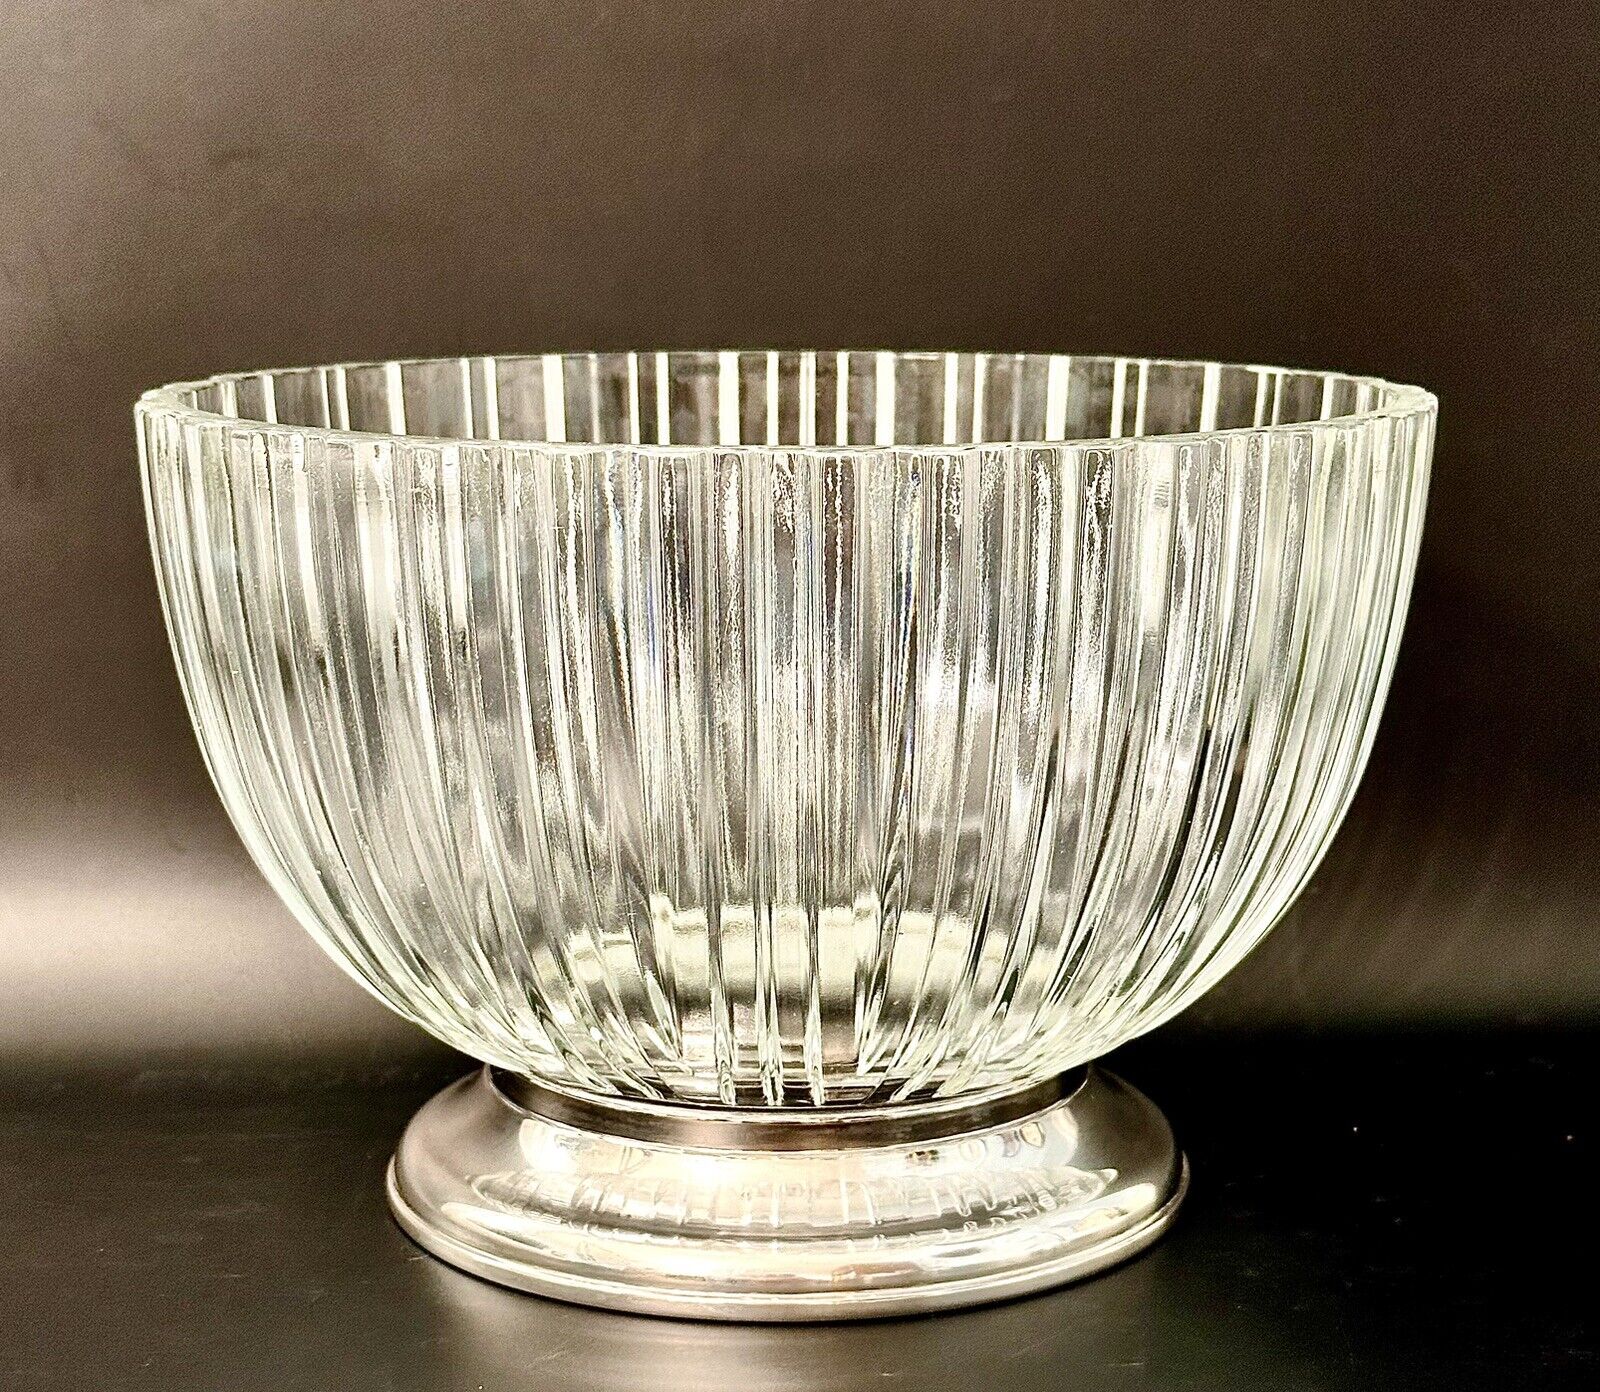 Elegant Ribbed Crystal Bowl With Silver Plate Base Made in Italy 8.75” x 5 5/8”